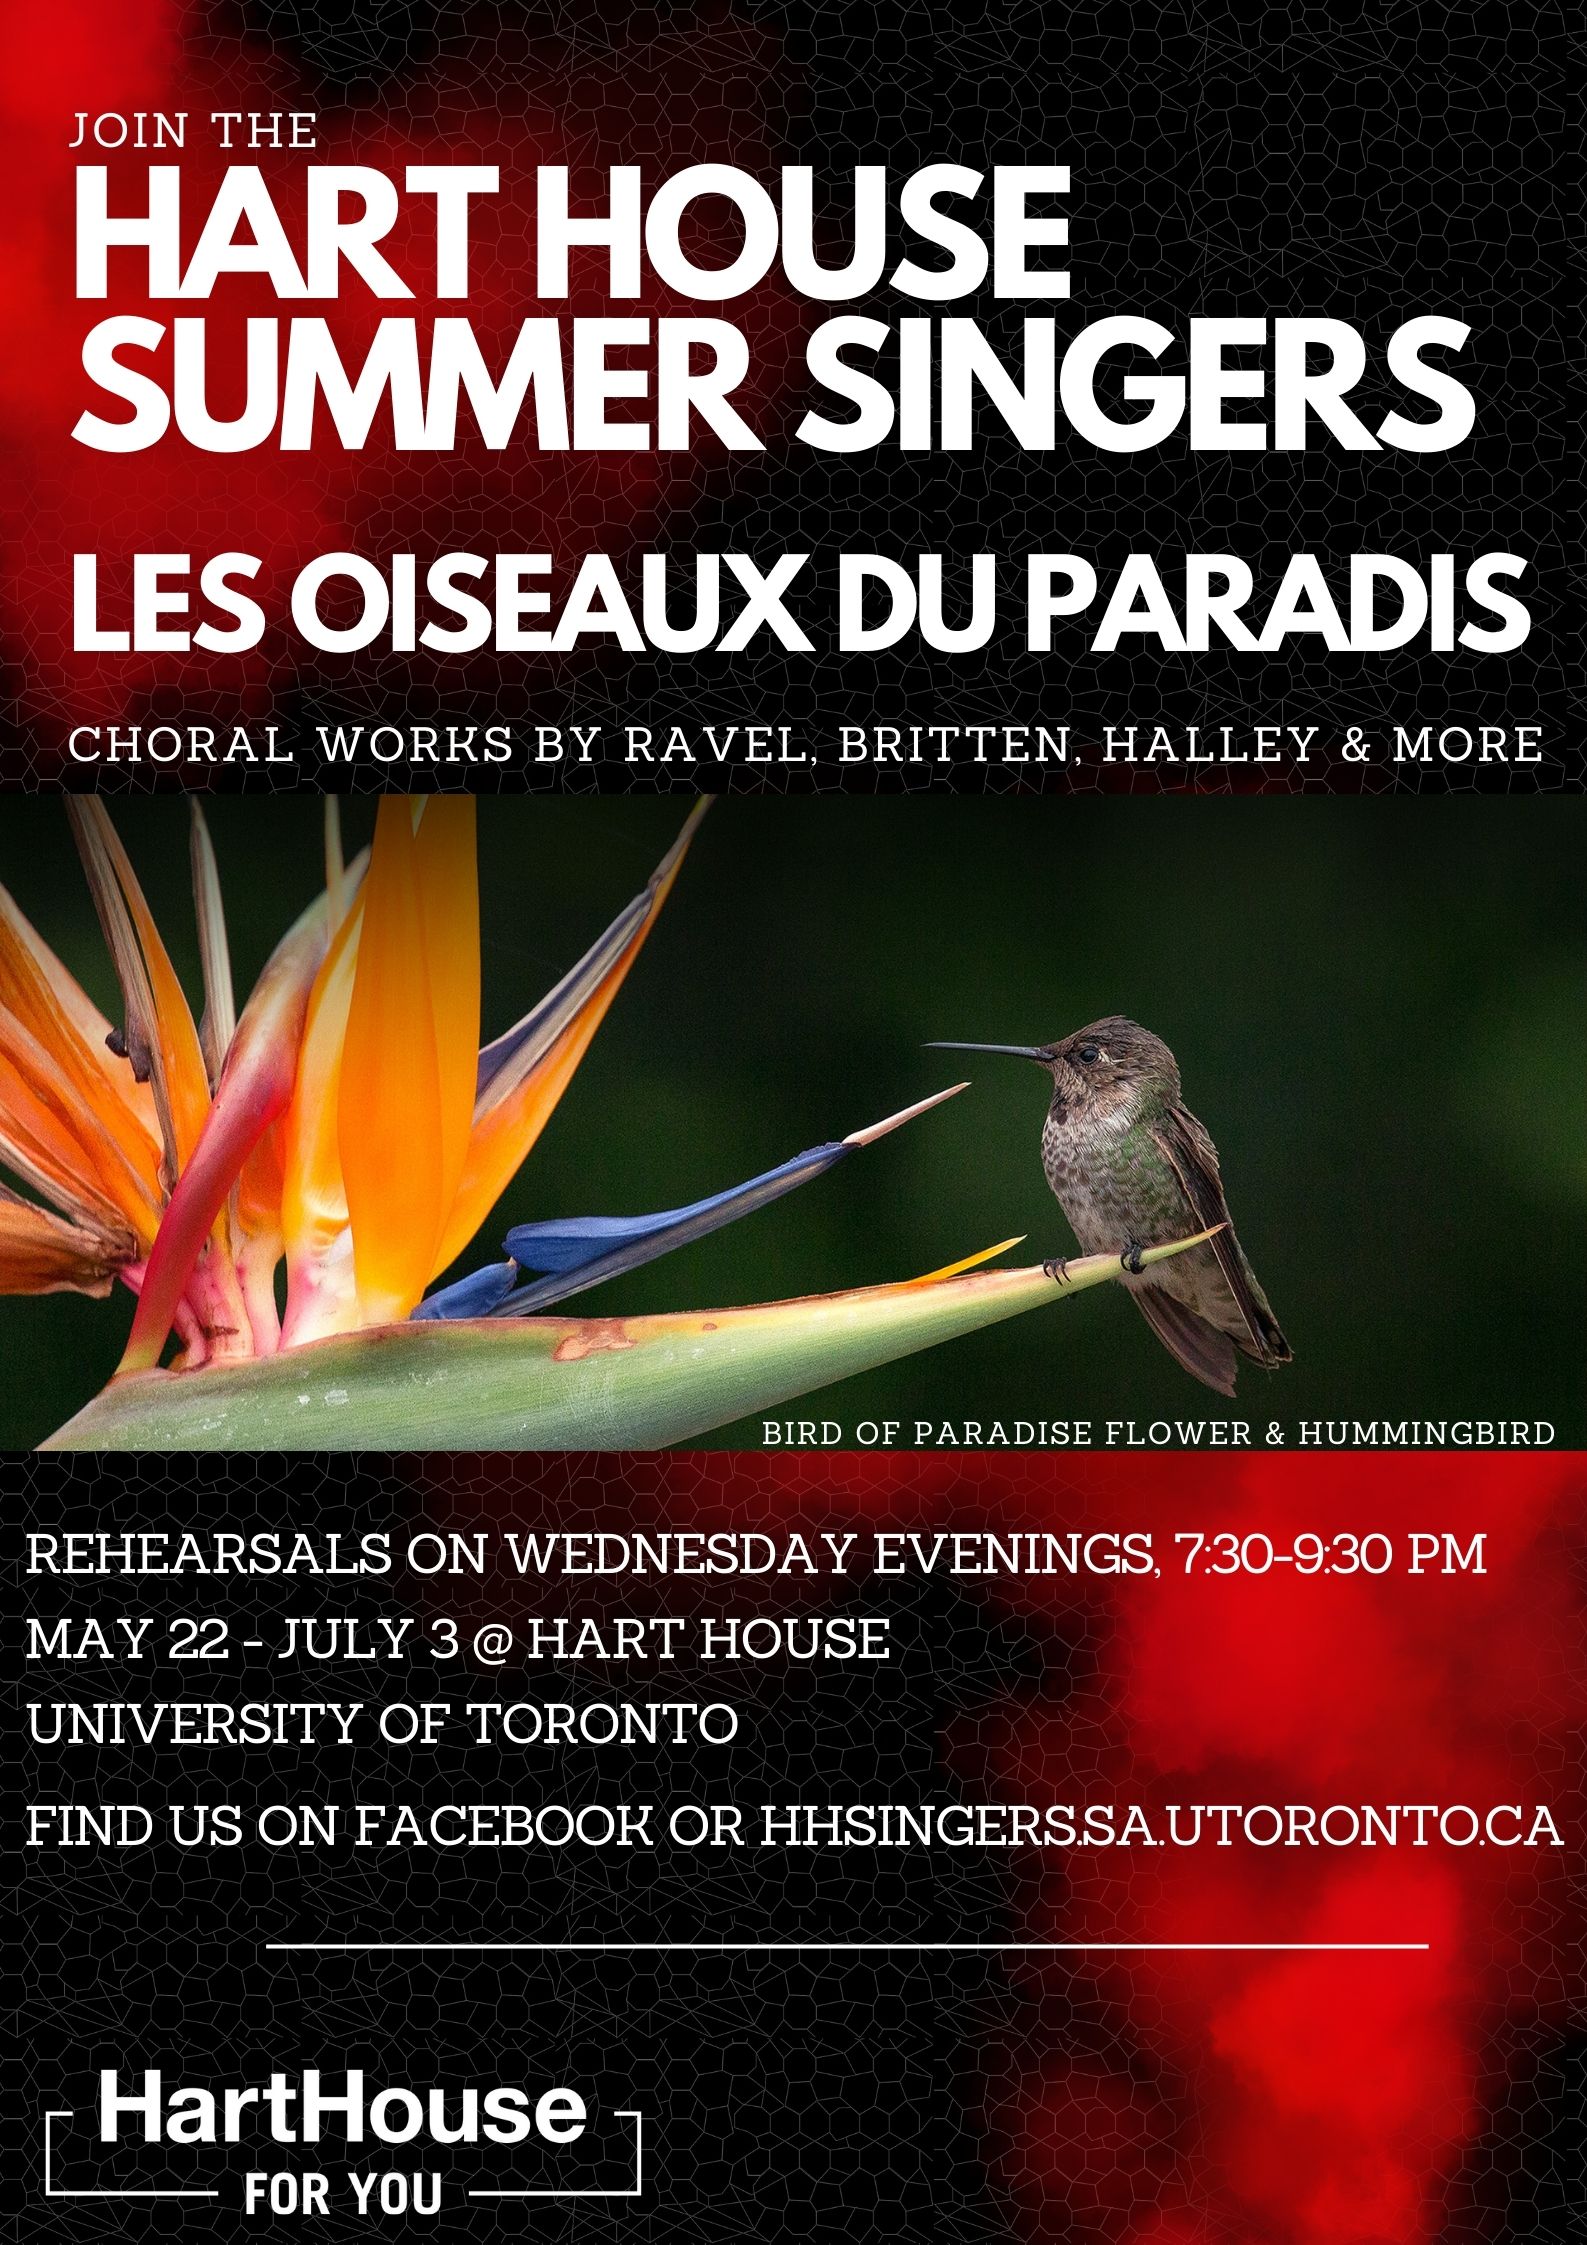 Join the Hart House Singers Les Oiseaux des Paradis, Choral Works by Ravel Britten, Halley and more. Wed. 7:30-9:30, May 22nd to July 3rd at Hart House.